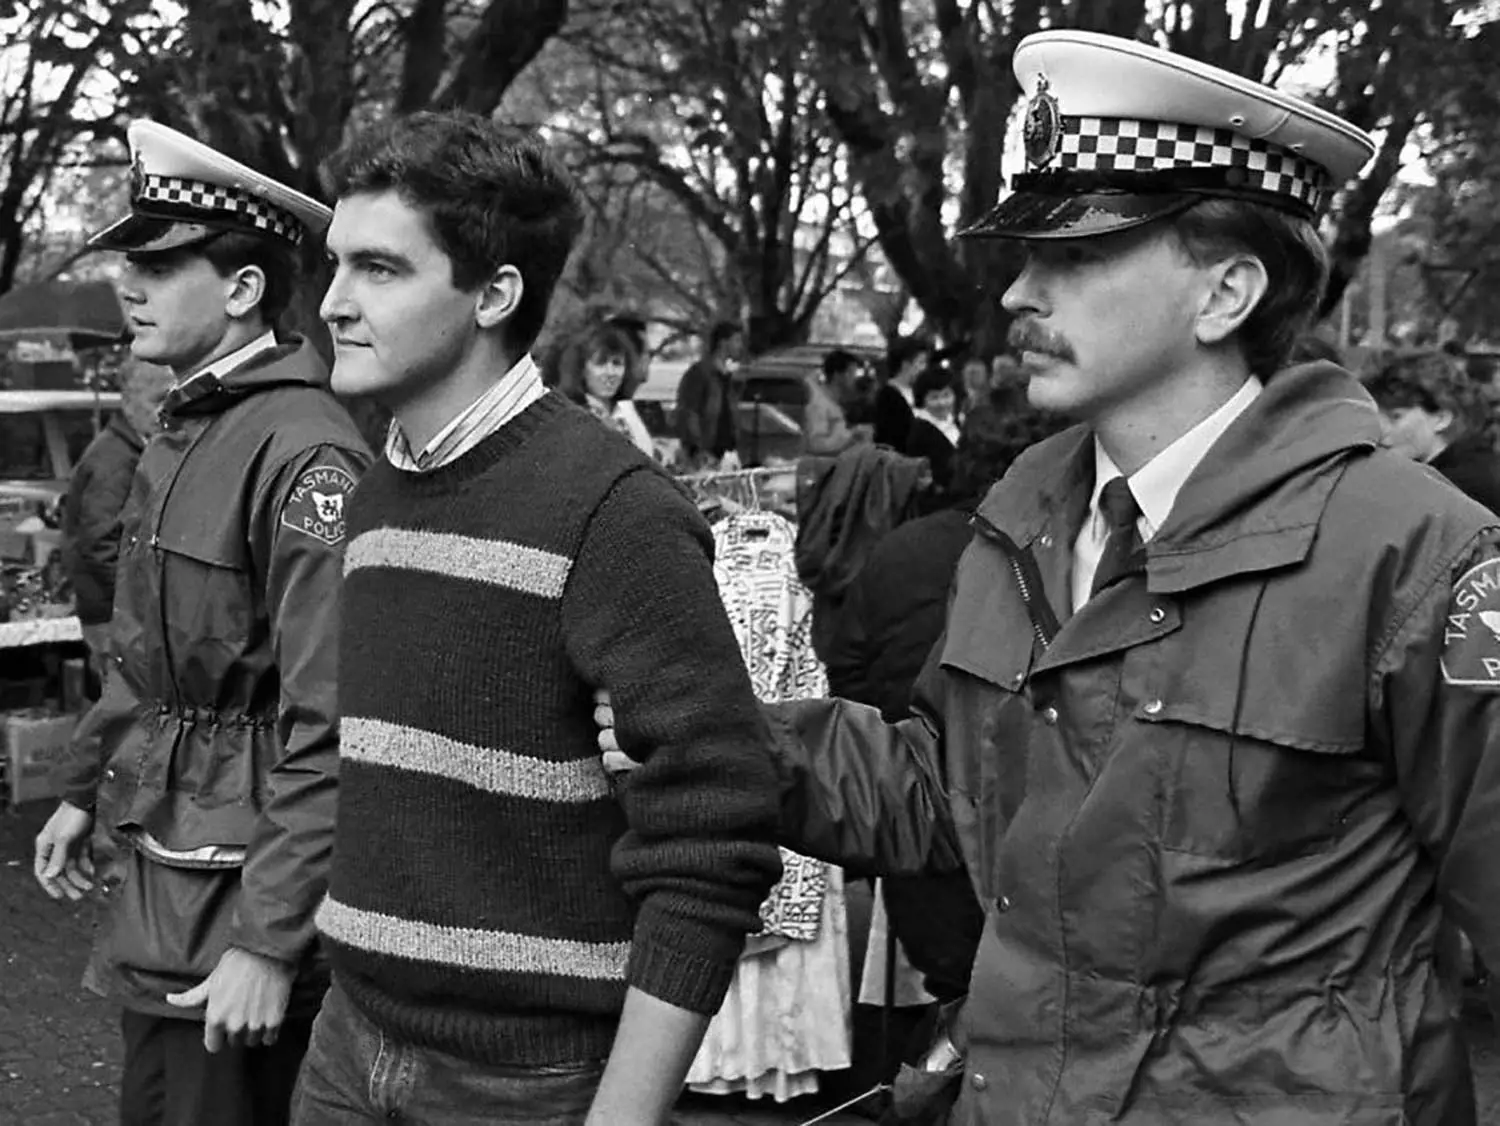 Rodney Croome being arrested in defence of the gay law reform at Salamanca Market in 1988.